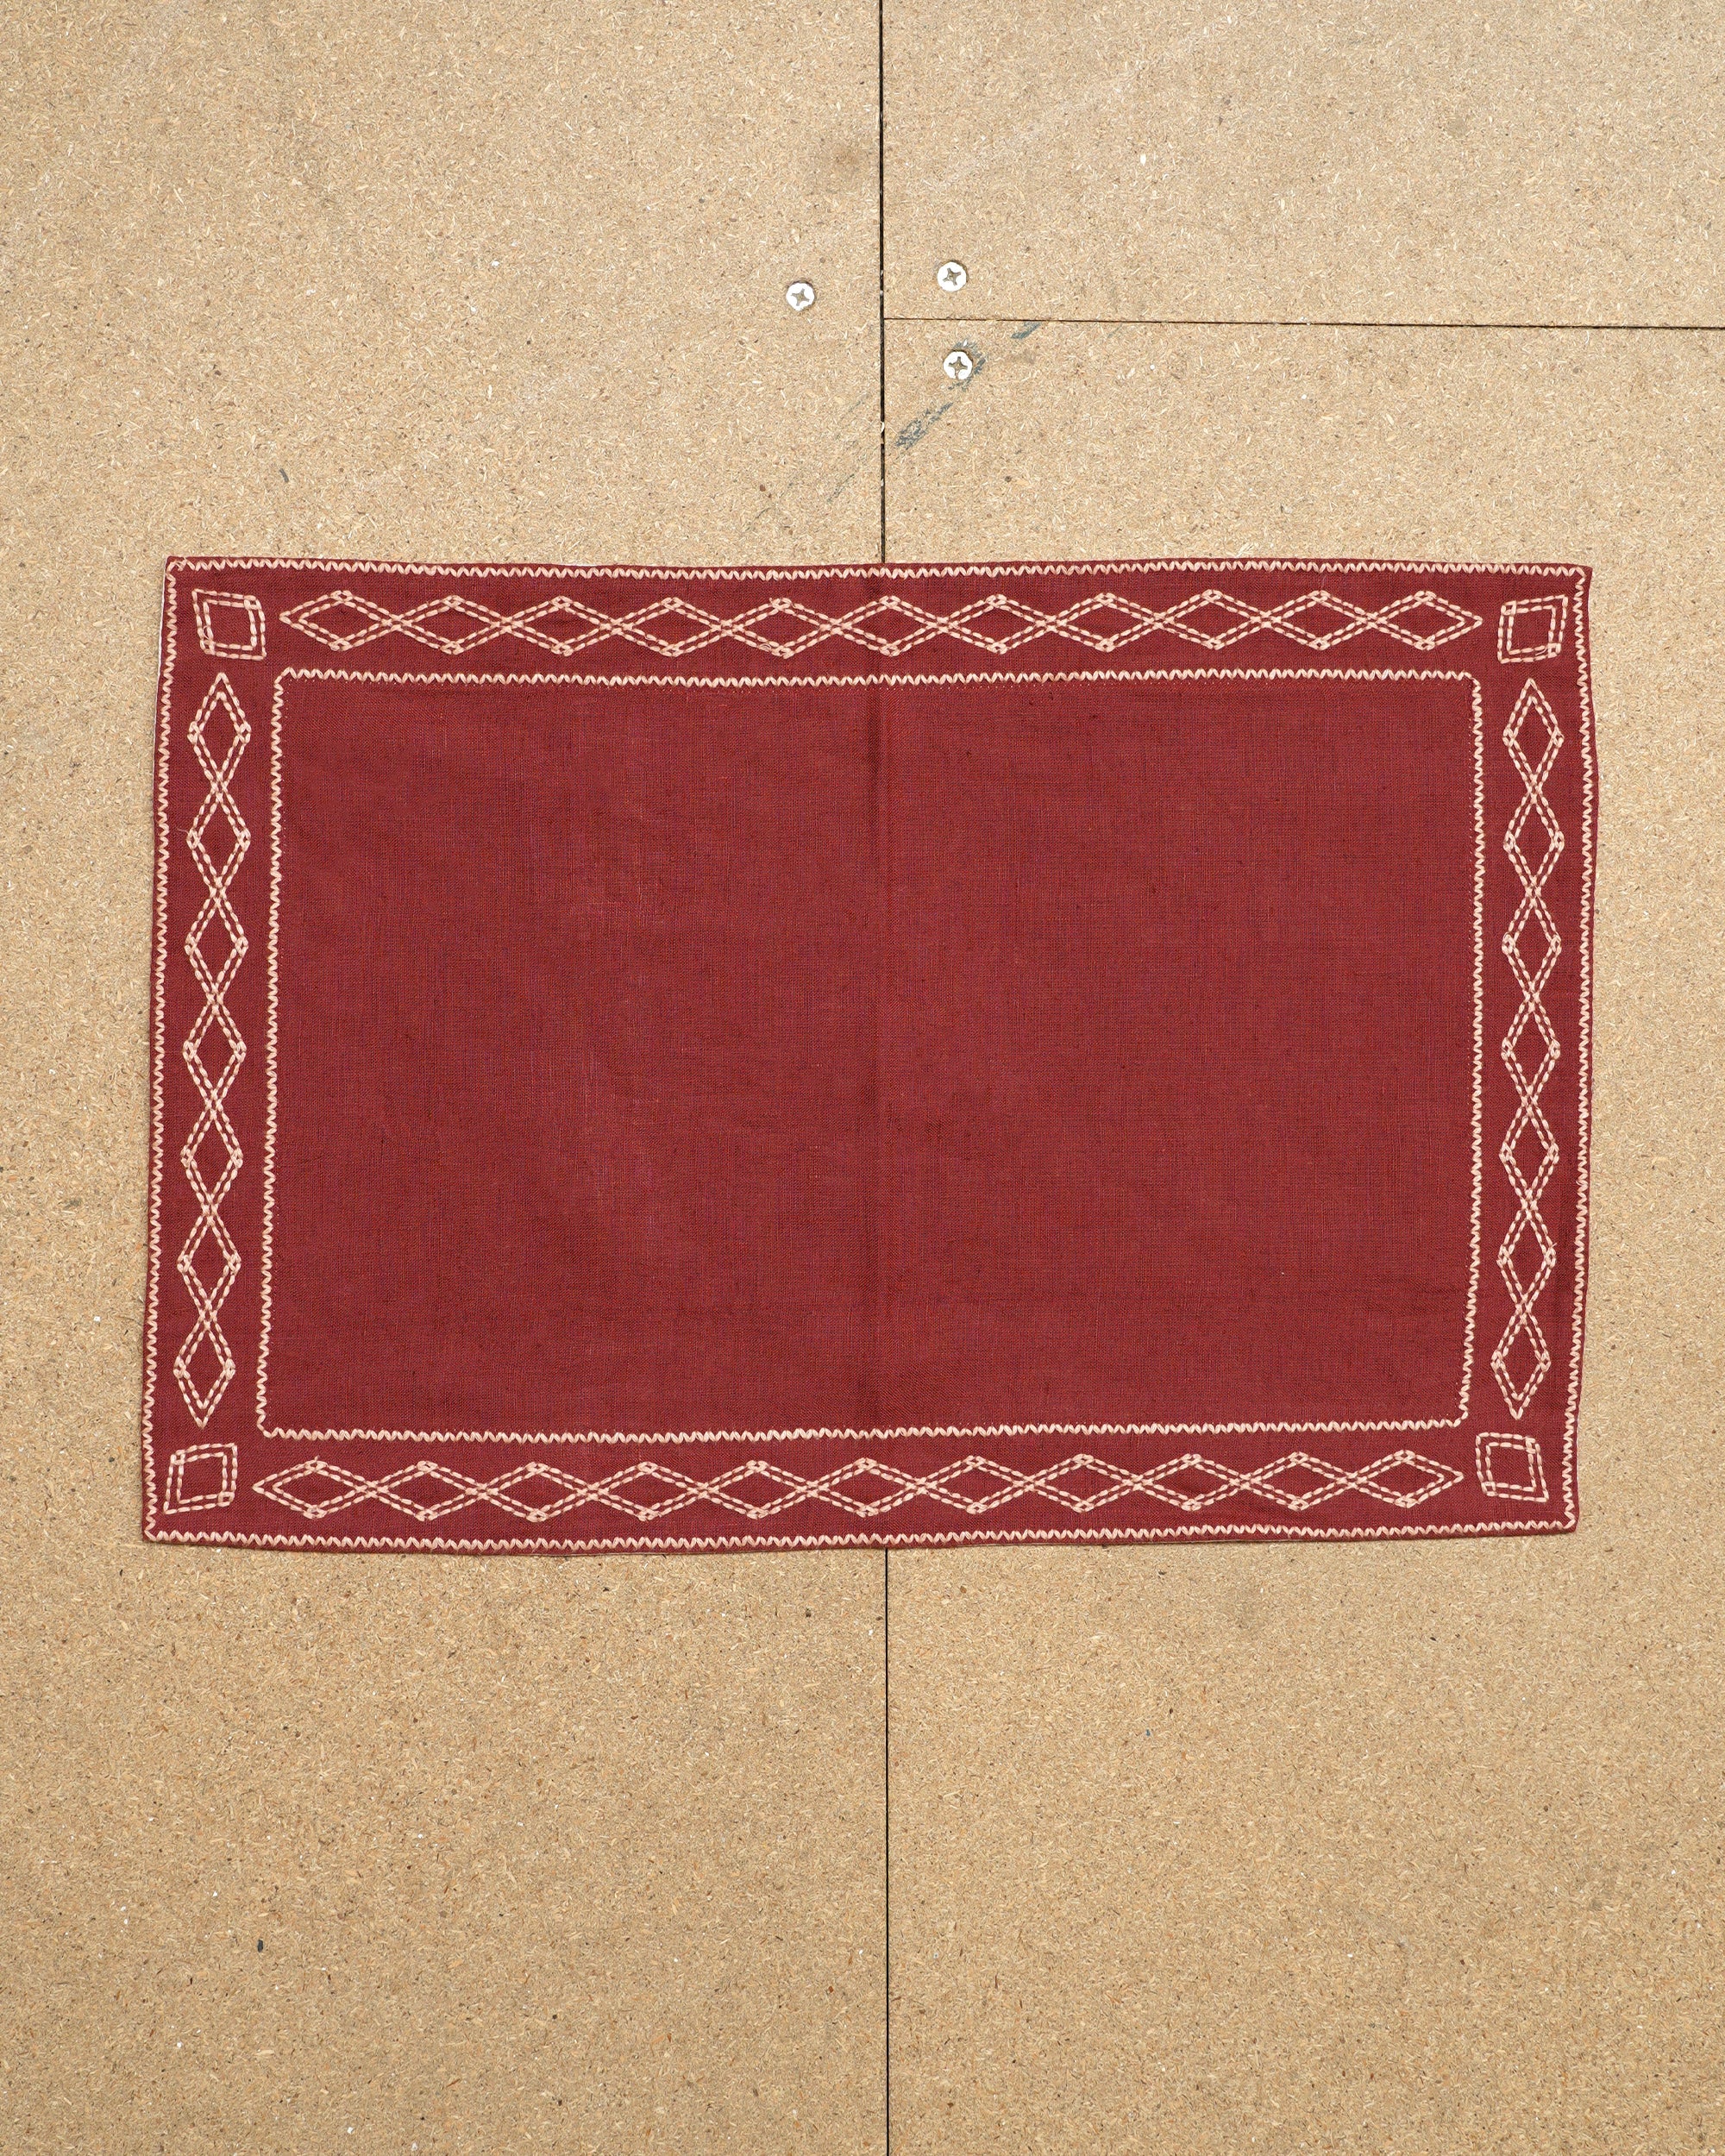 Shashiko Embroidered Placemat - Russet Red